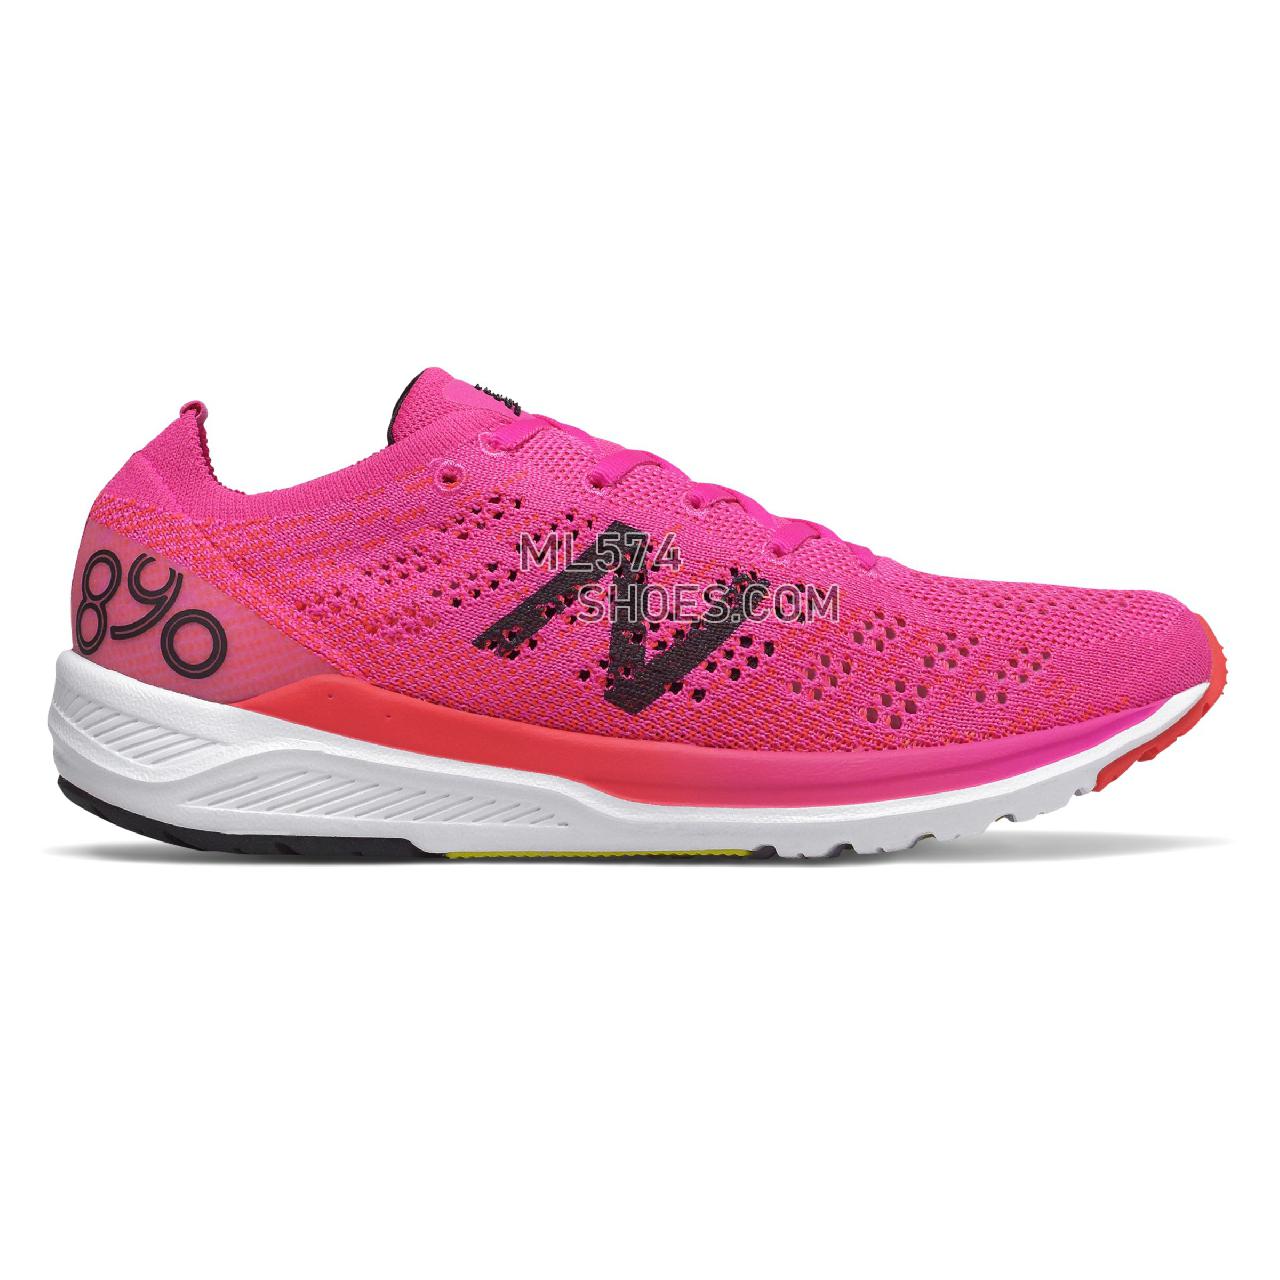 New Balance 890v7 - Women's Neutral Running - Peony with Energy Red - W890PO7